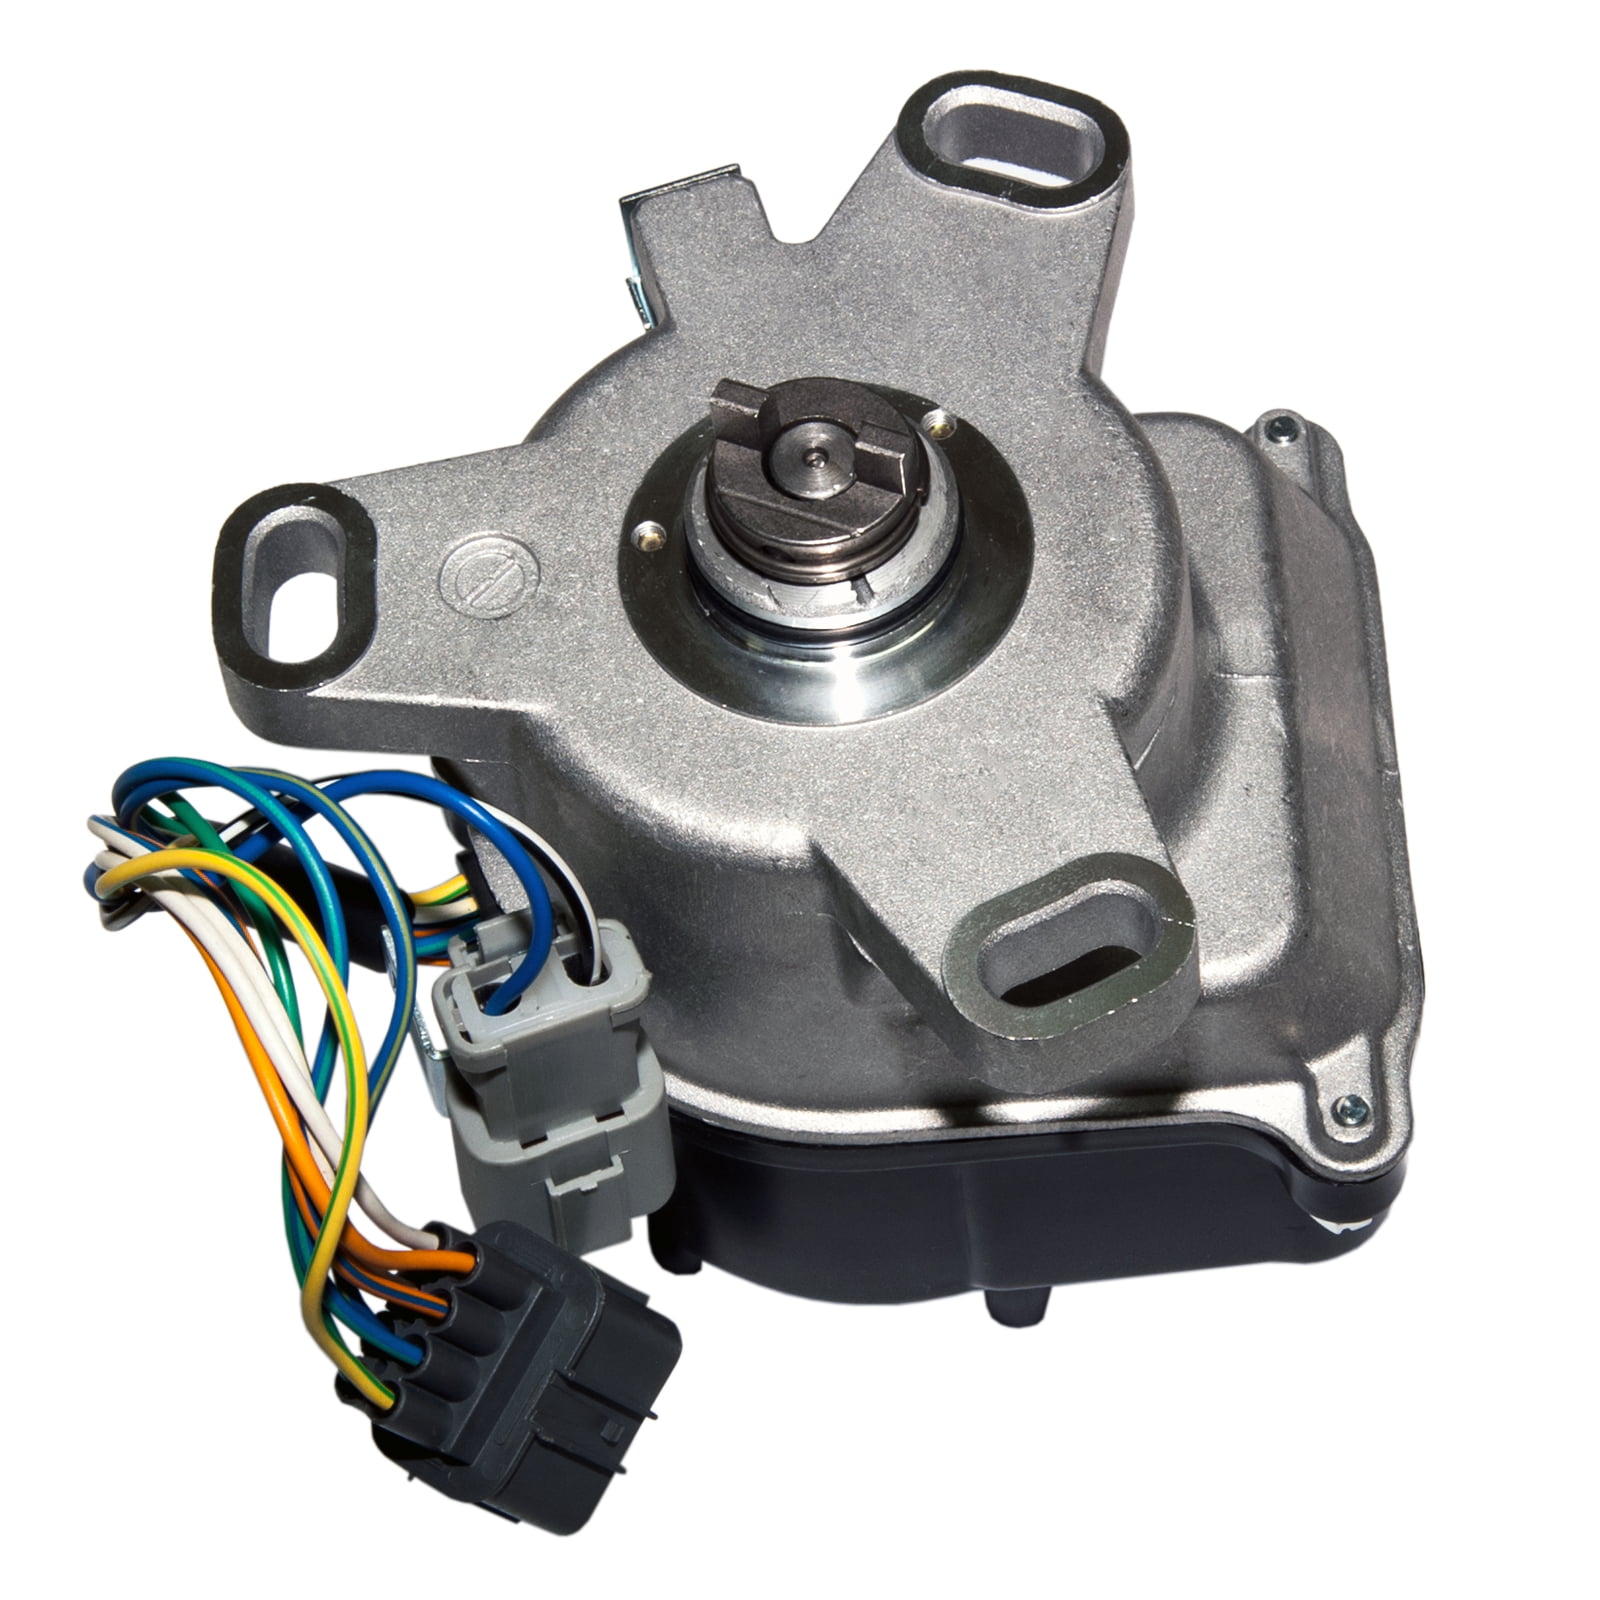 Brand New Compatible Ignition Distributor w/Cap & Rotor TD-52U TD-59U for 92-95 Honda Accord Prelude 2.2L External Coil 30100-PT3-A12 Hollander 606-58717 King Auto Parts